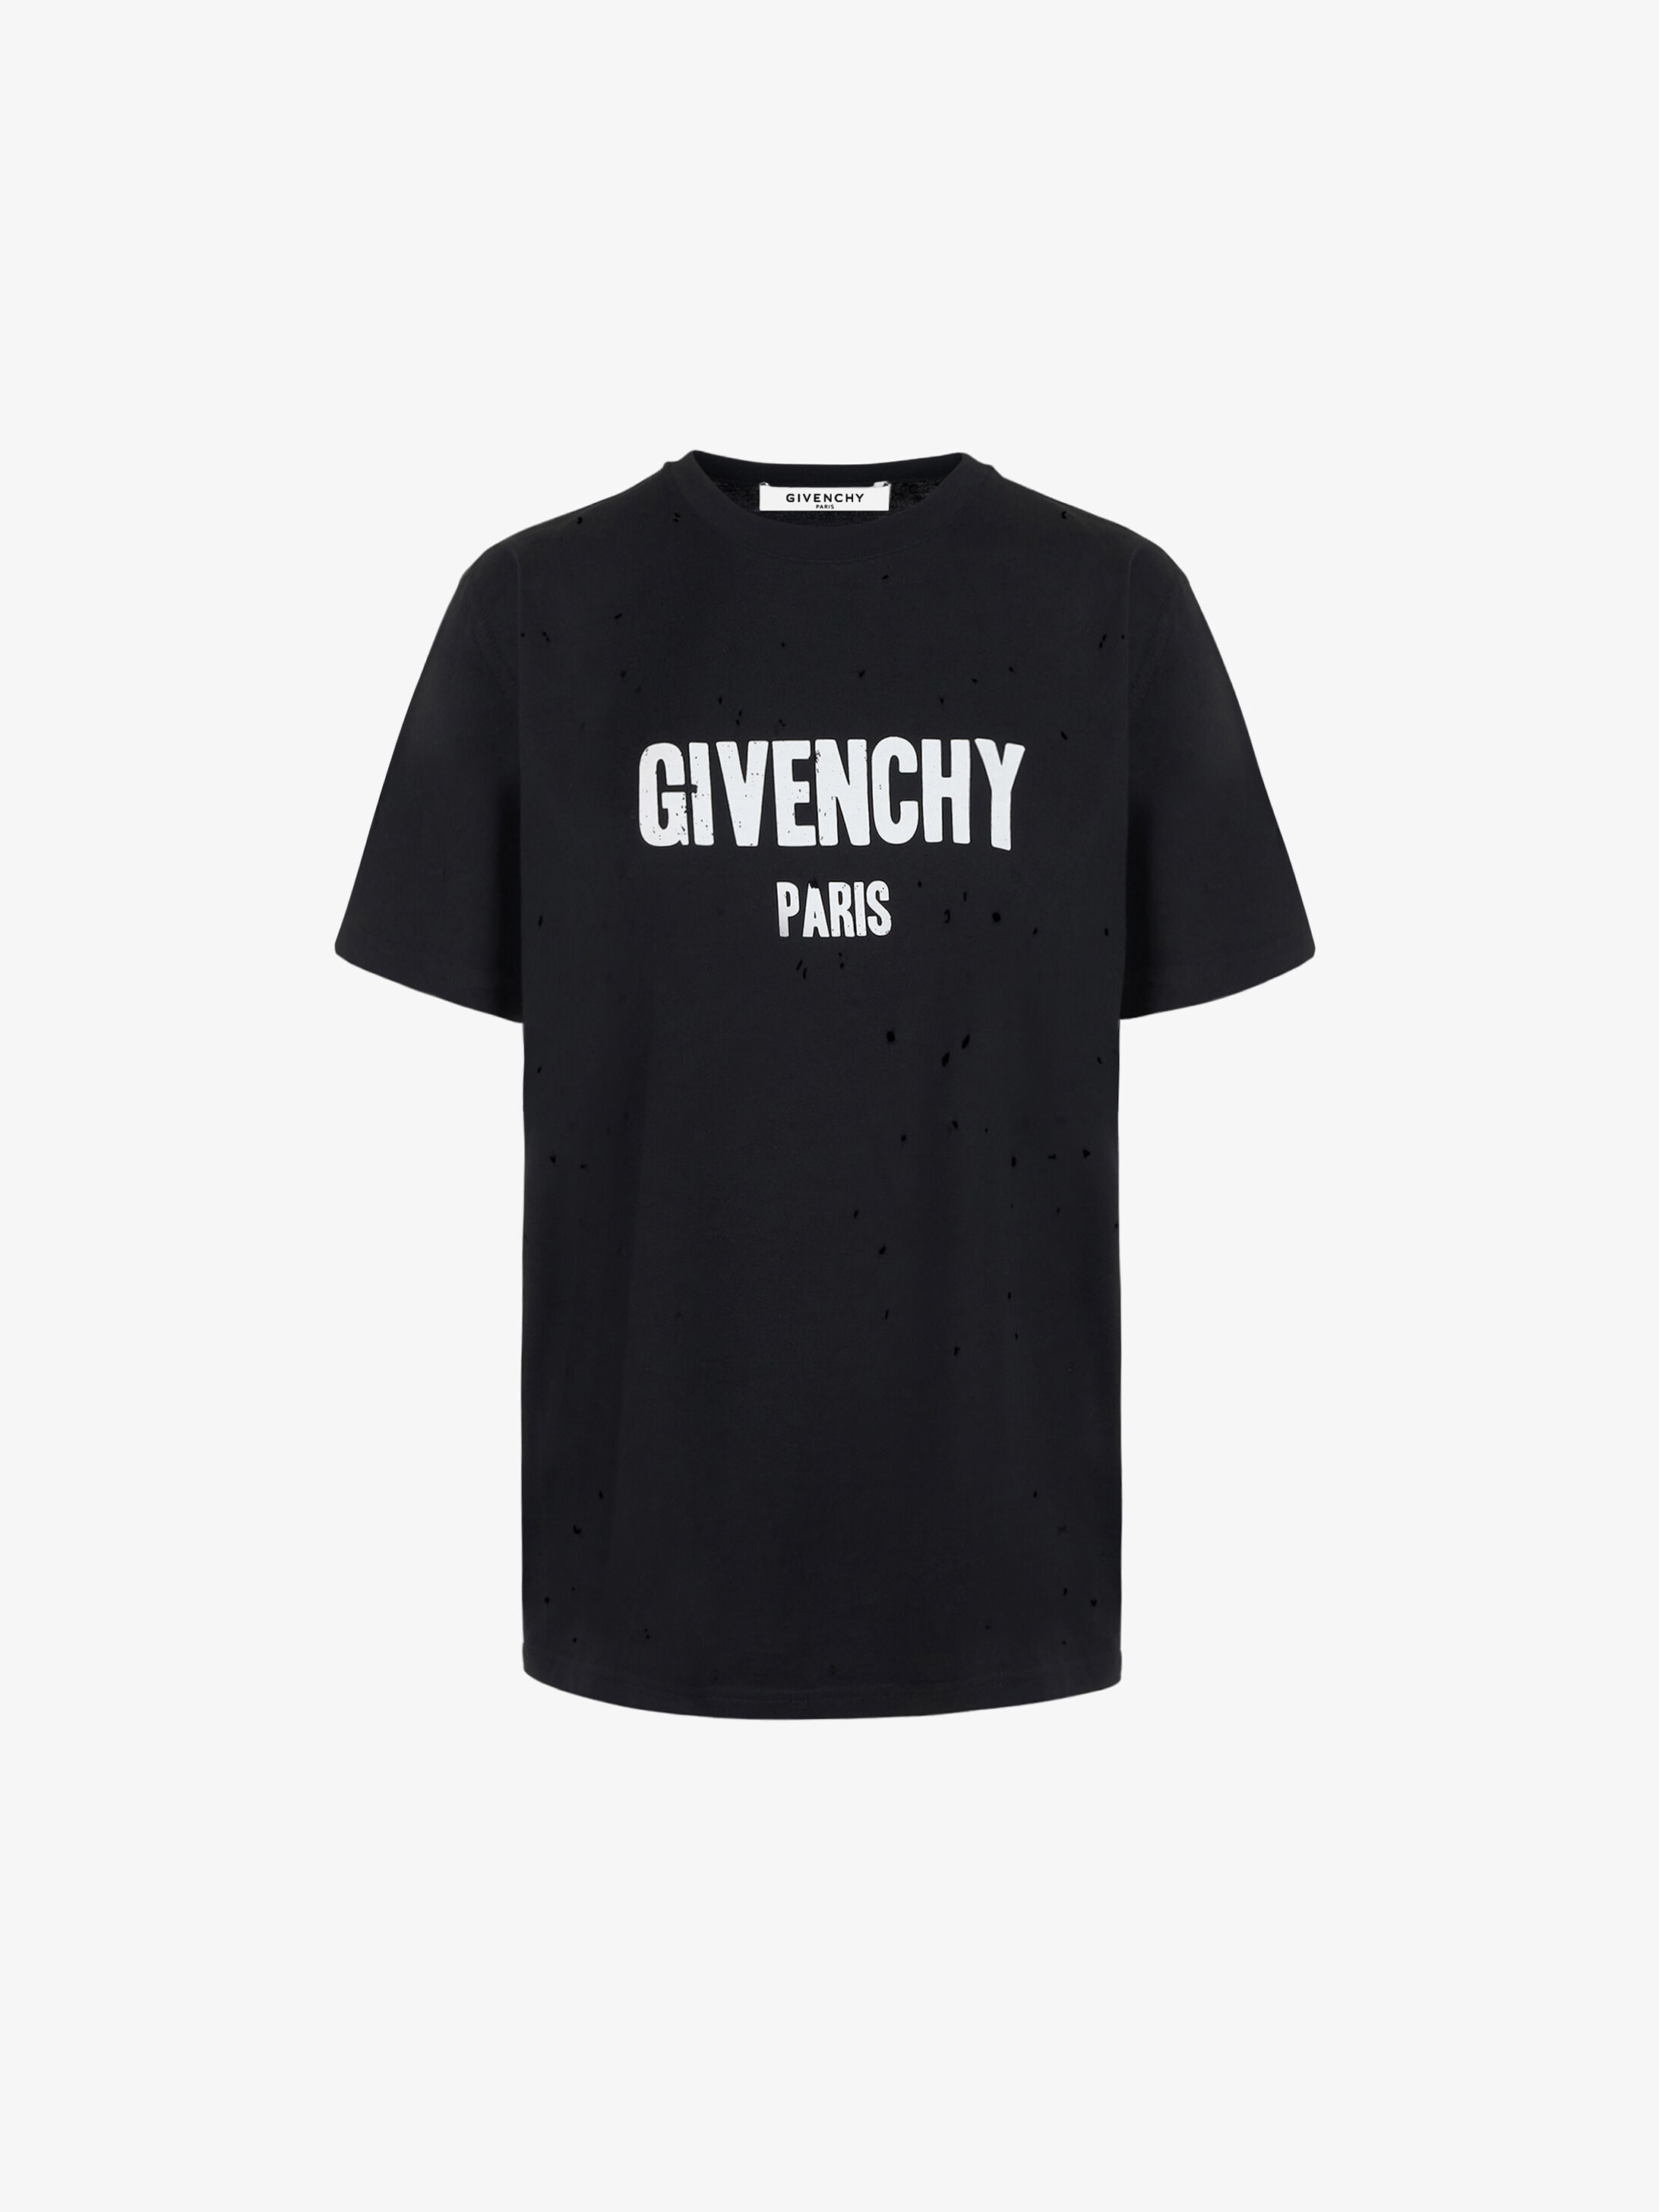 givenchy black red t shirt